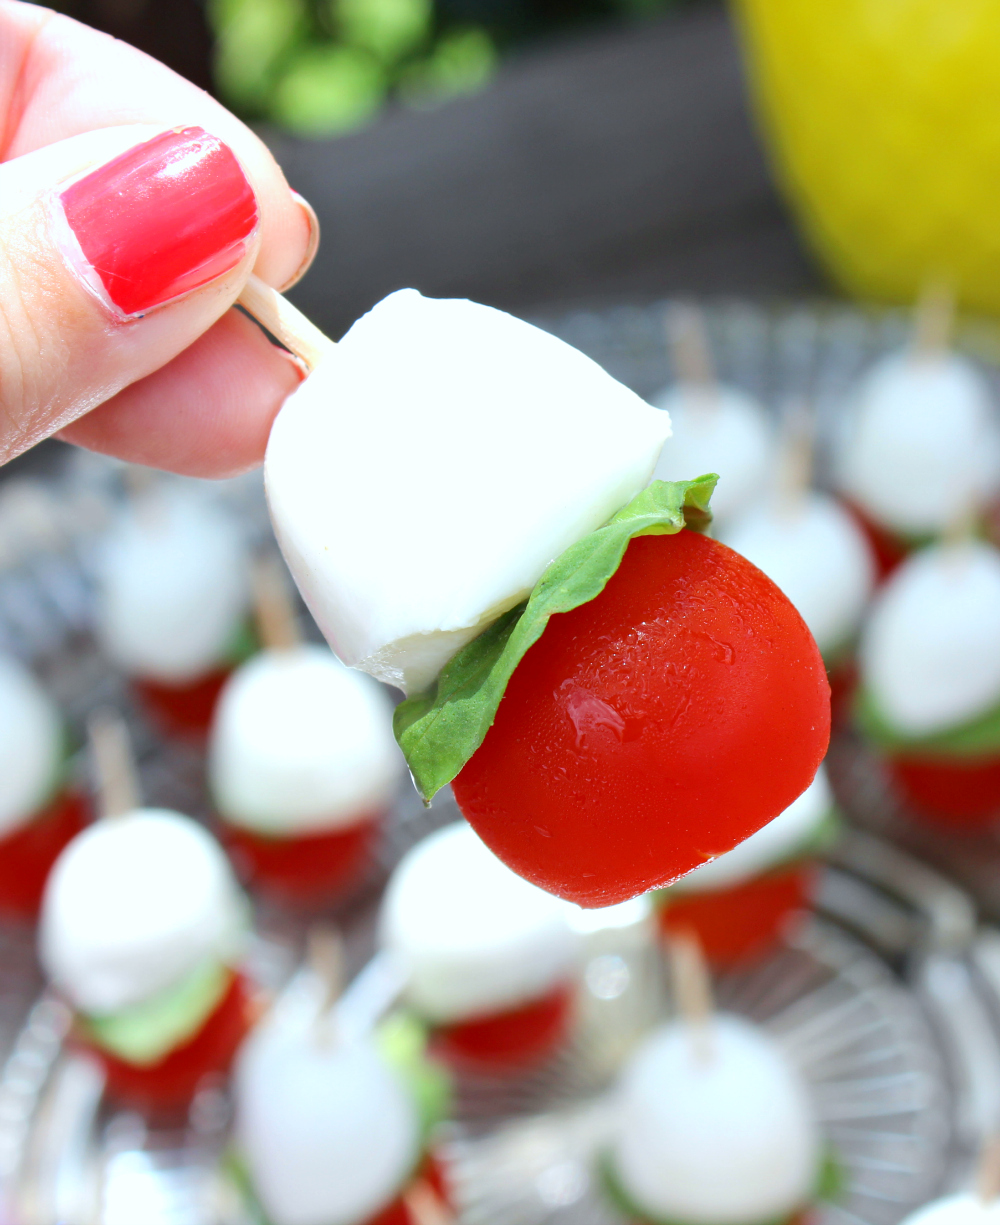 Looking for an easy summer appetizer? These caprese bites are a crowd favorite!